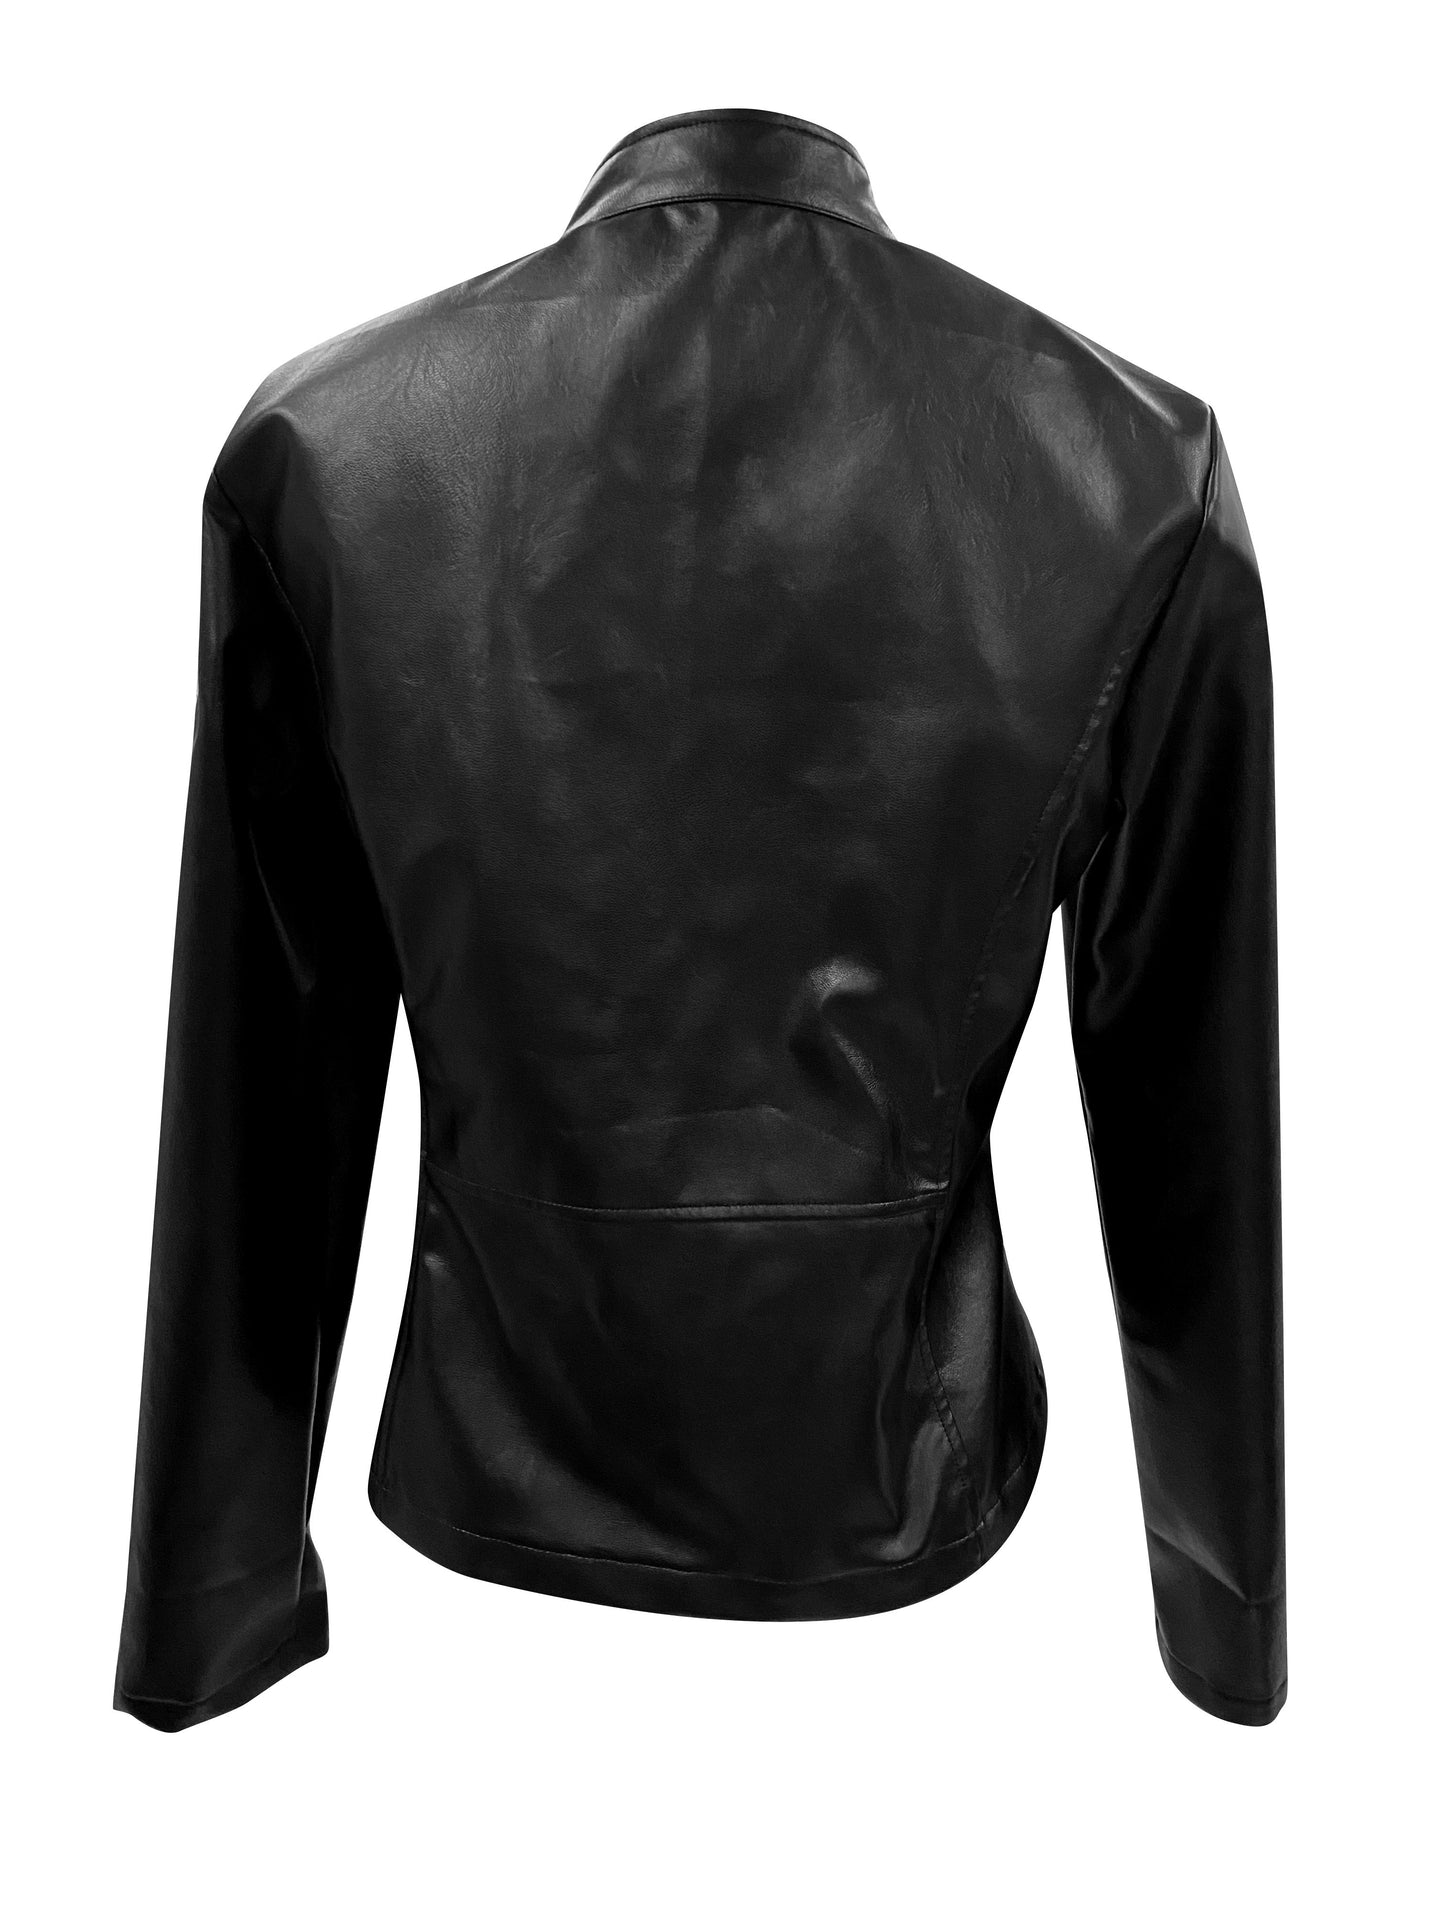 Antmvs Solid Zip Up Biker Jacket, Casual Long Sleeve Stylish Outerwear, Women's Clothing